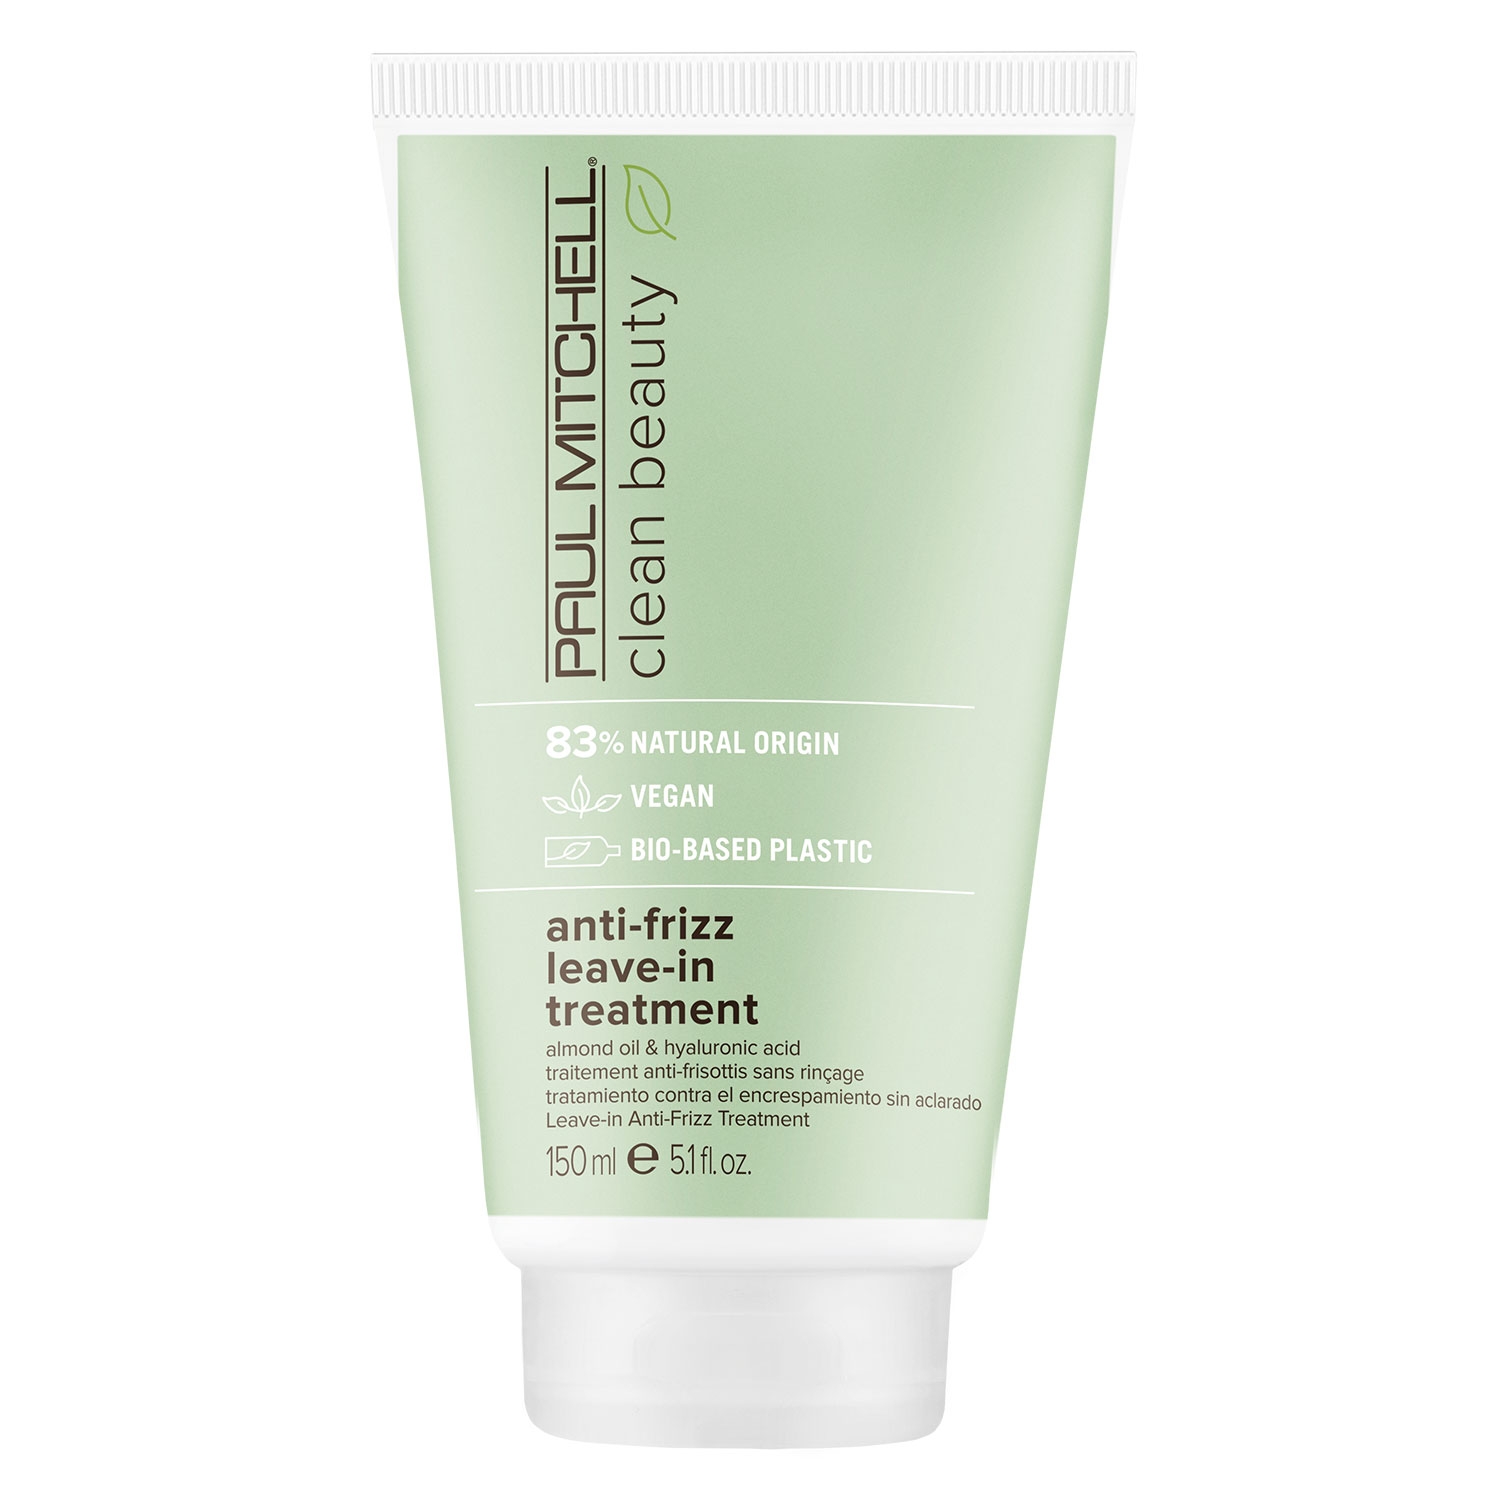 Product image from Paul Mitchell Clean Beauty - Anti-Frizz Leave-In Treatment